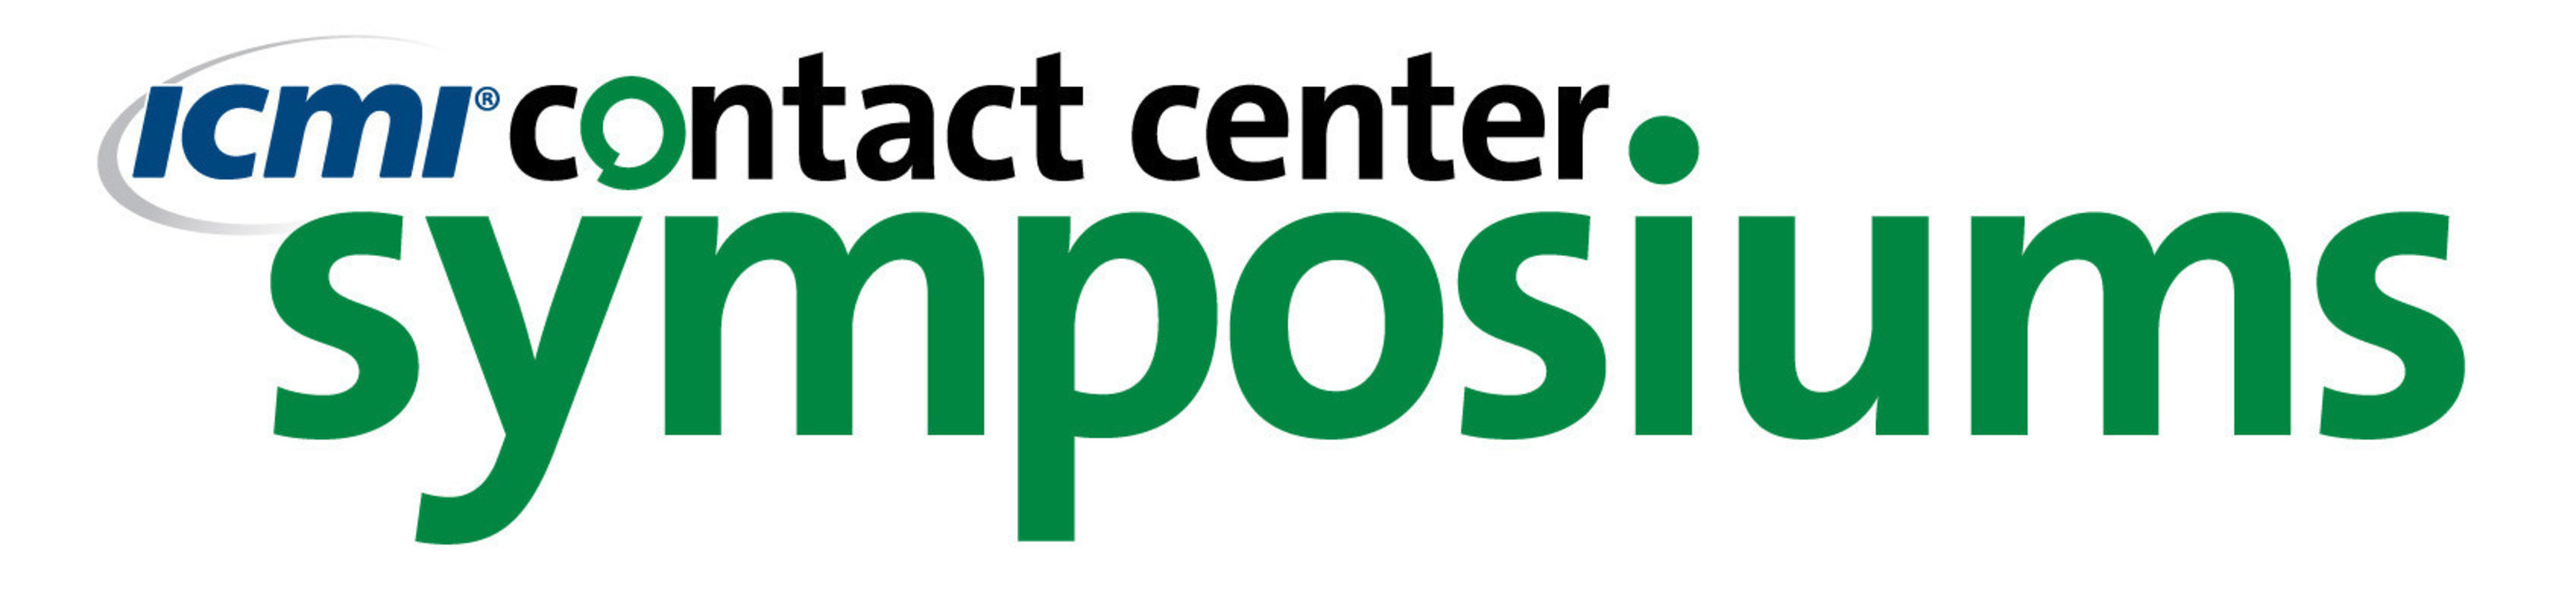 ICMI, the leading global provider of comprehensive resources for customer management professionals, today announced its local Call Center Site Tours during the first Contact Center Training Symposium in 2015. The first 2015 Contact Center Training Symposium will take place March 17-20, 2015 in San Diego, CA.